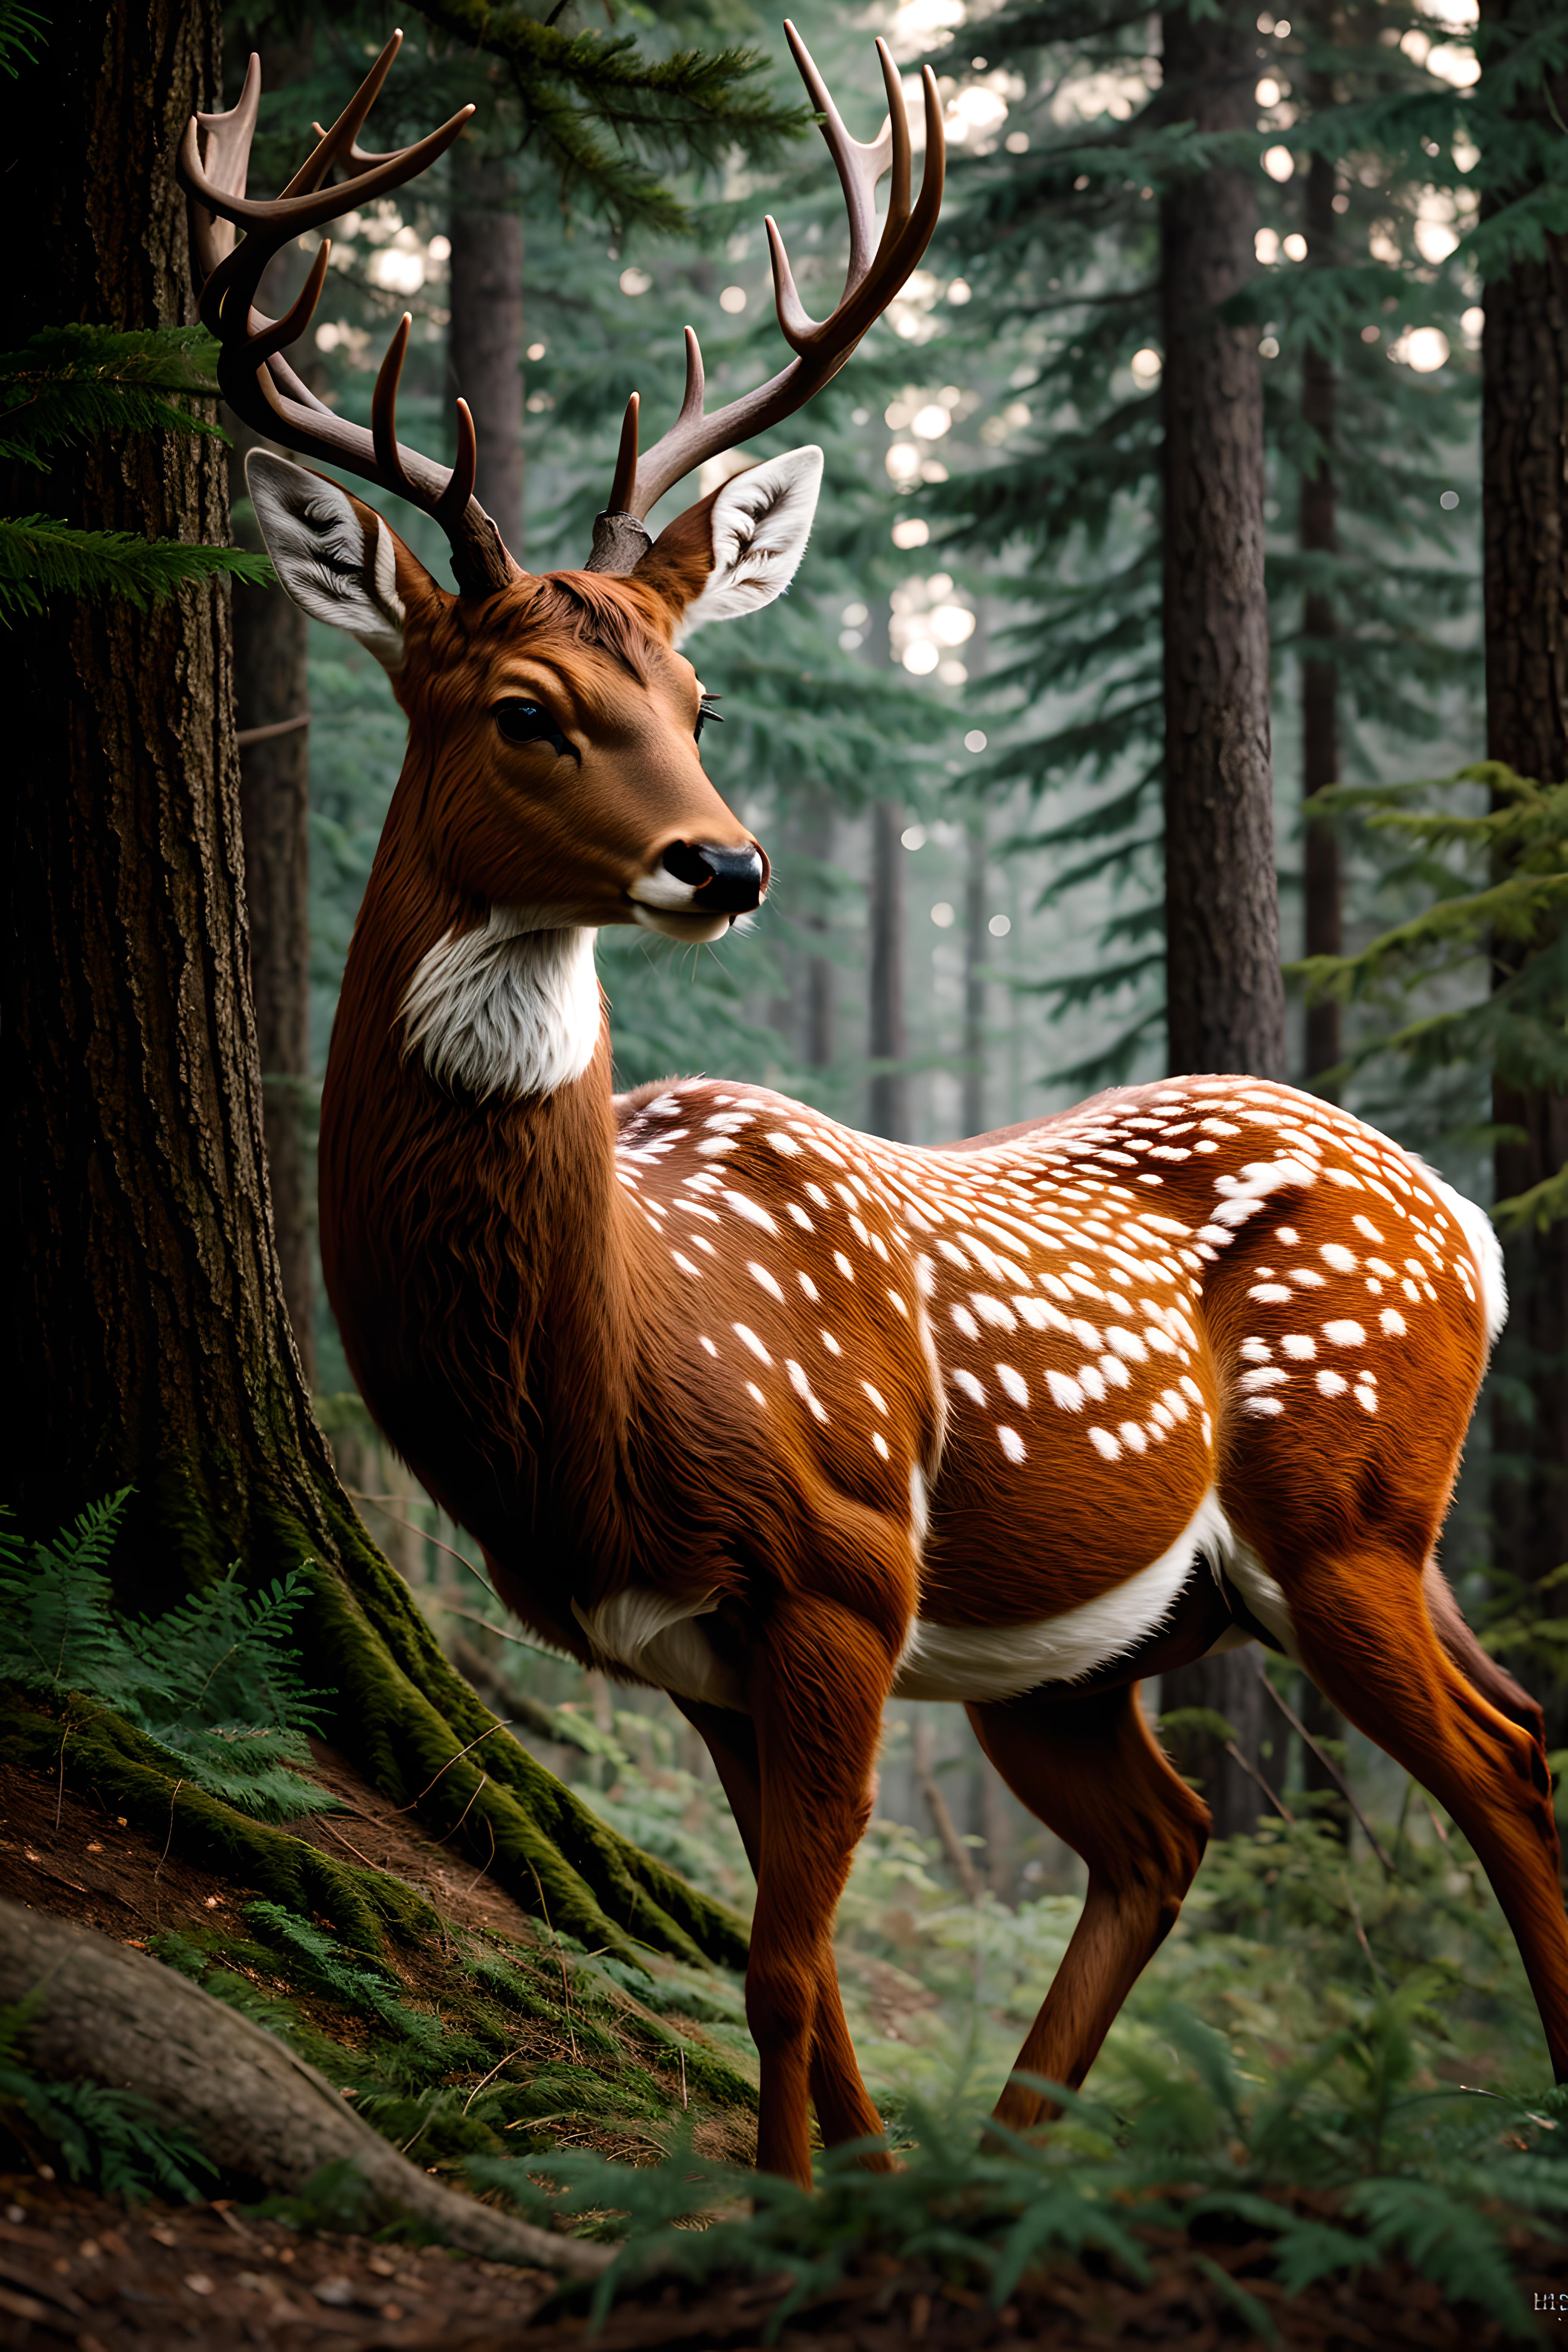 A deer with antlers standing in a forest.